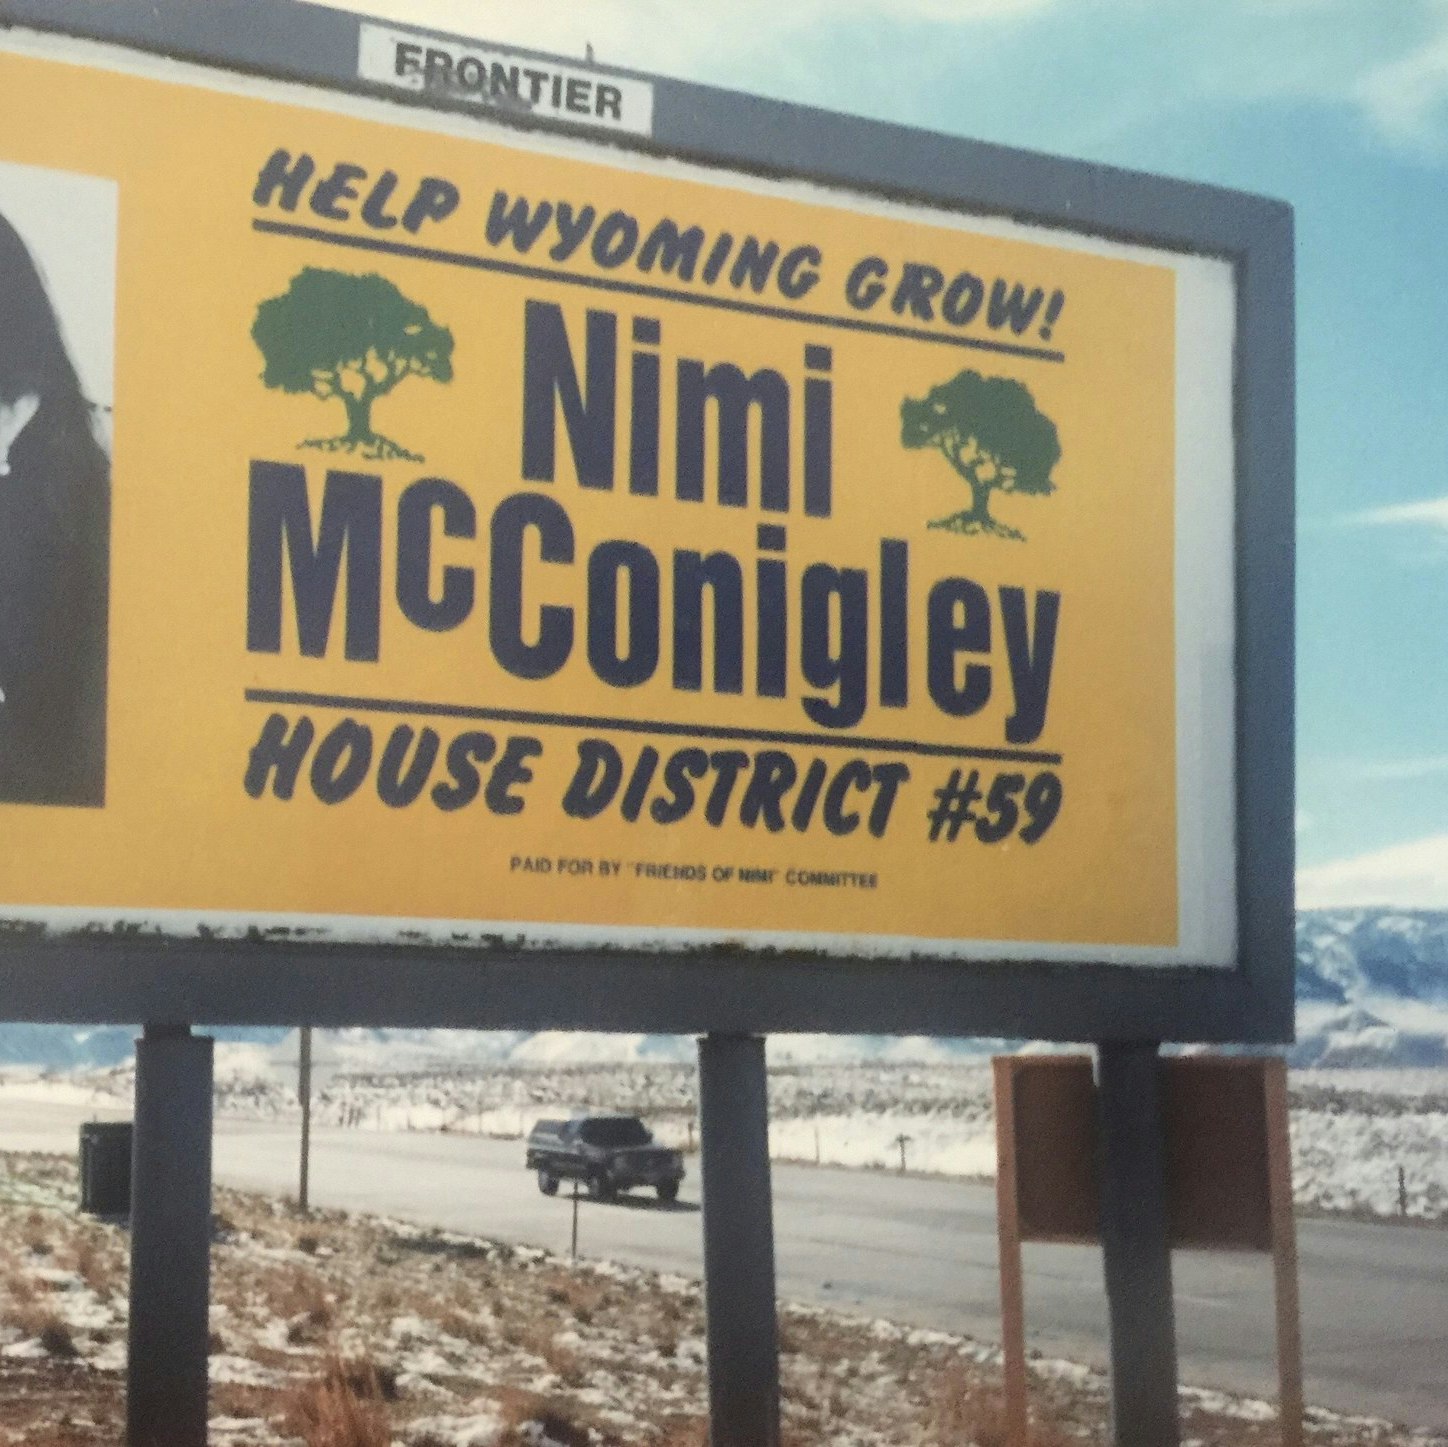 Billboard image of Nina Mcconigley's mother, Nimi McConigley, reading "Help Wyoming Grow!" and "House District #59"